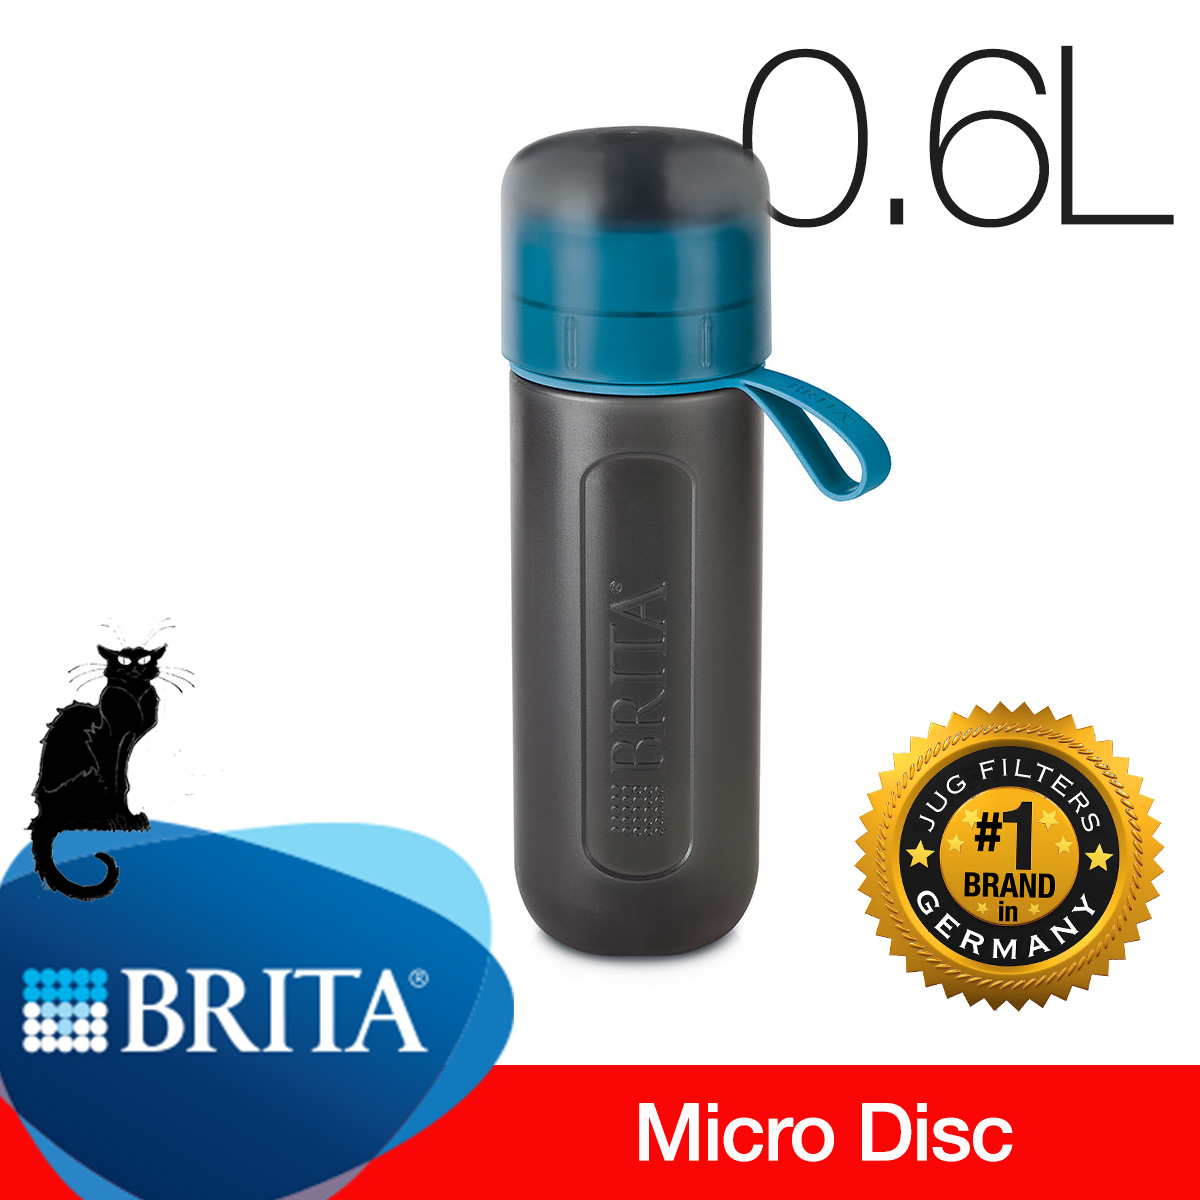 This is how the BRITA MicroDisc water filter gives you great tasting water  